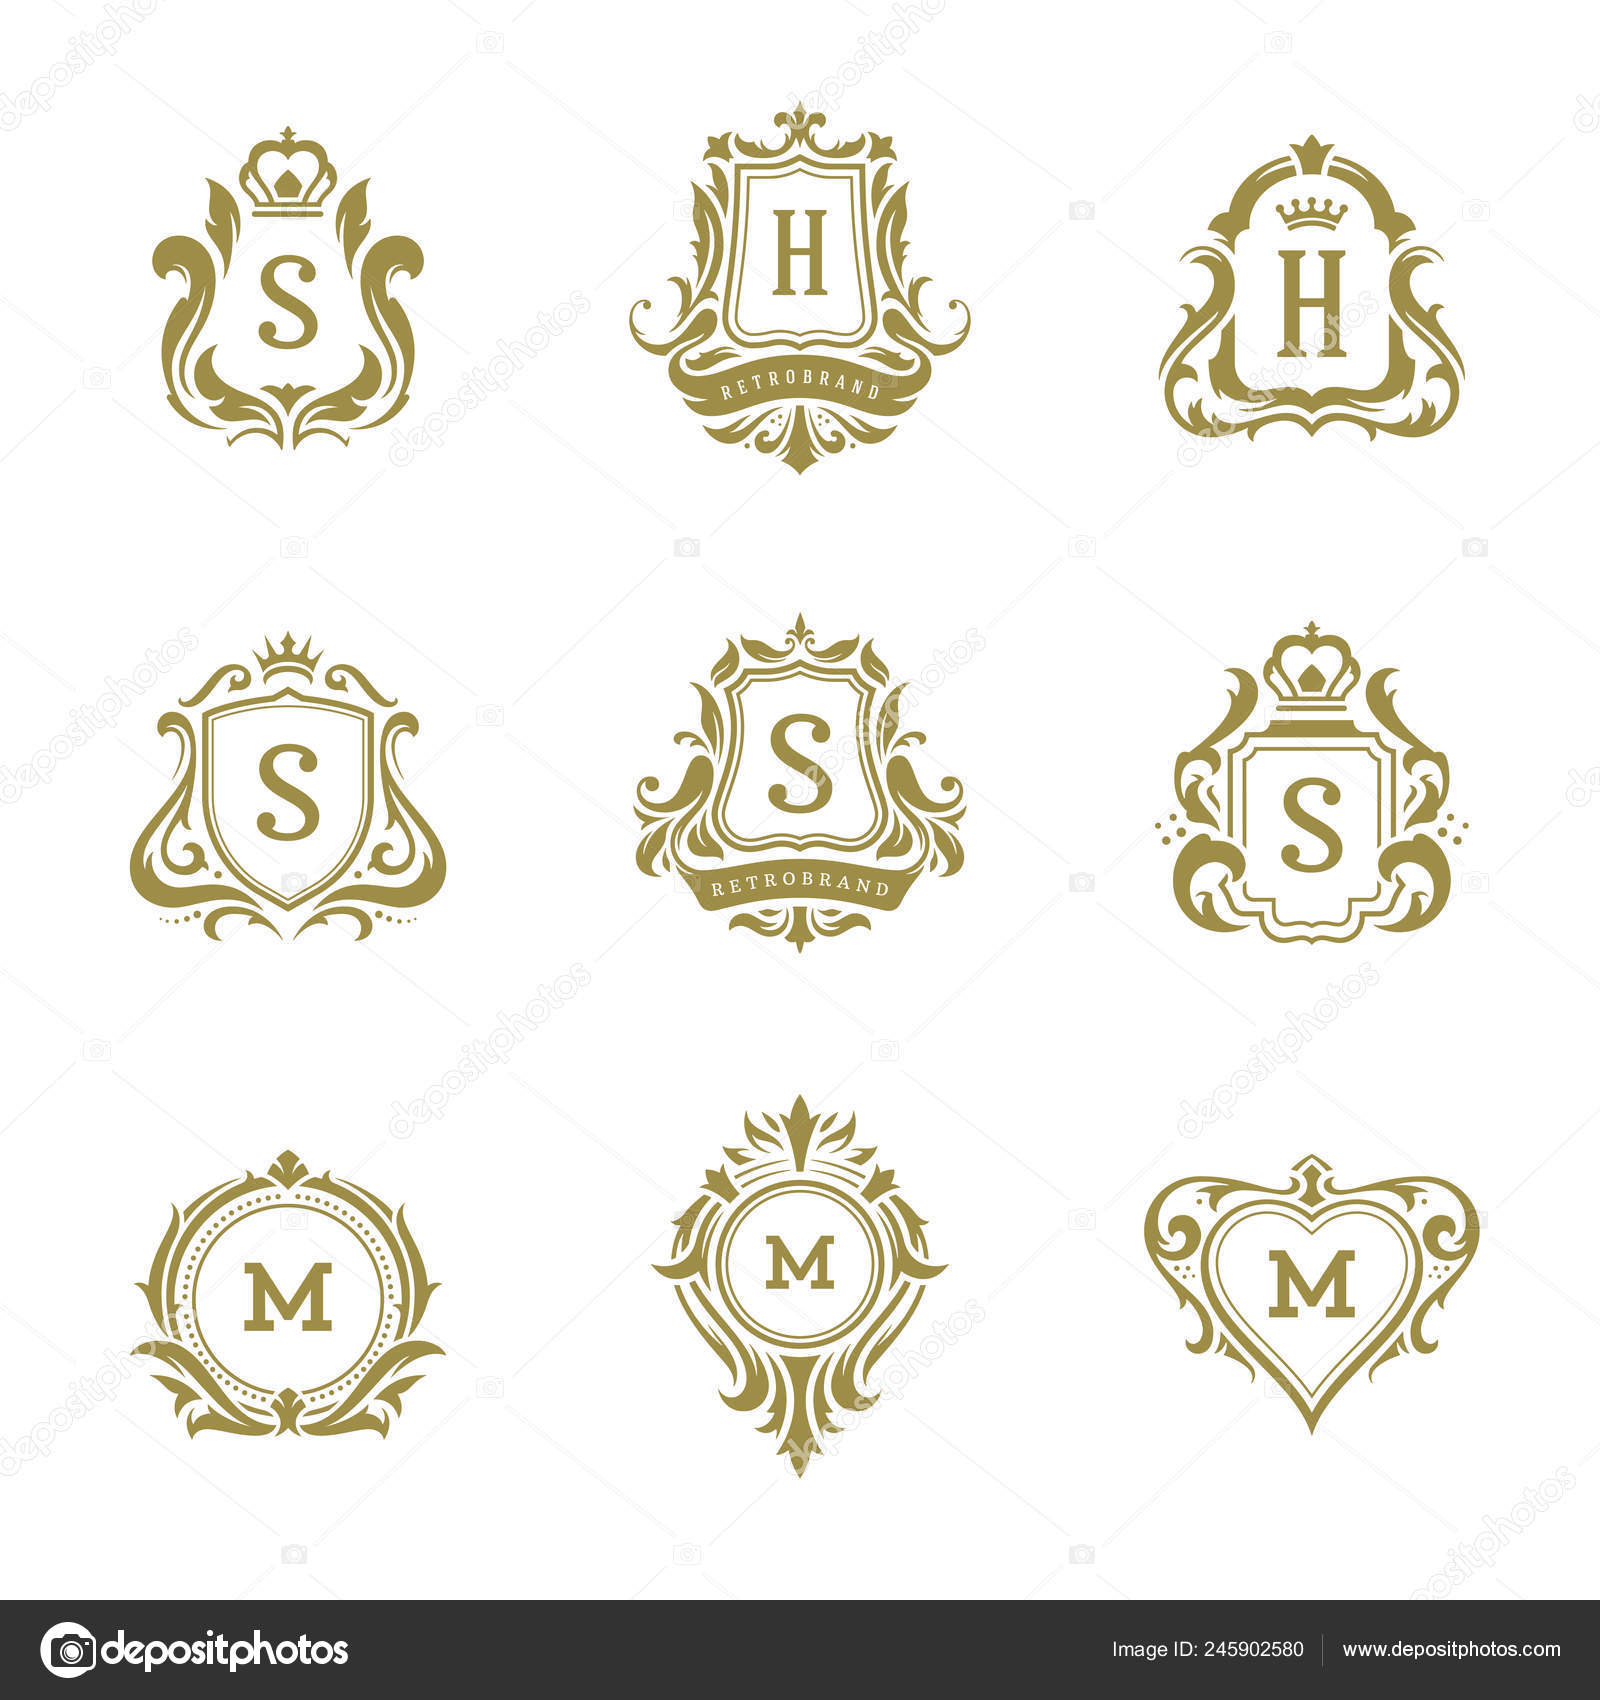 Monograms, Crests and Logos